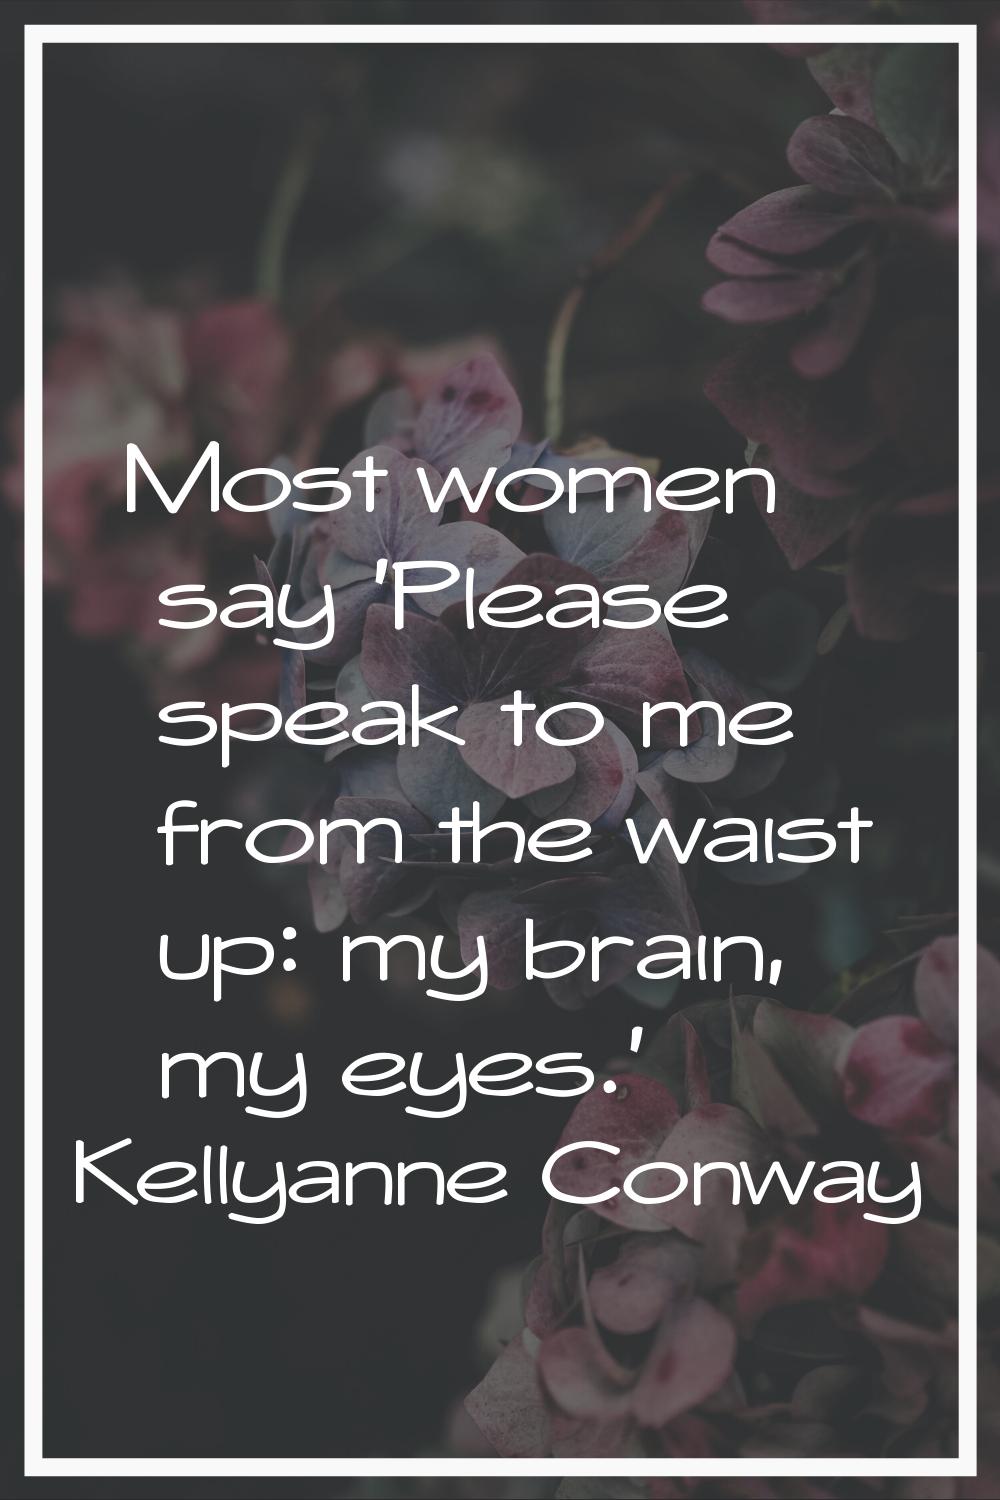 Most women say 'Please speak to me from the waist up: my brain, my eyes.'